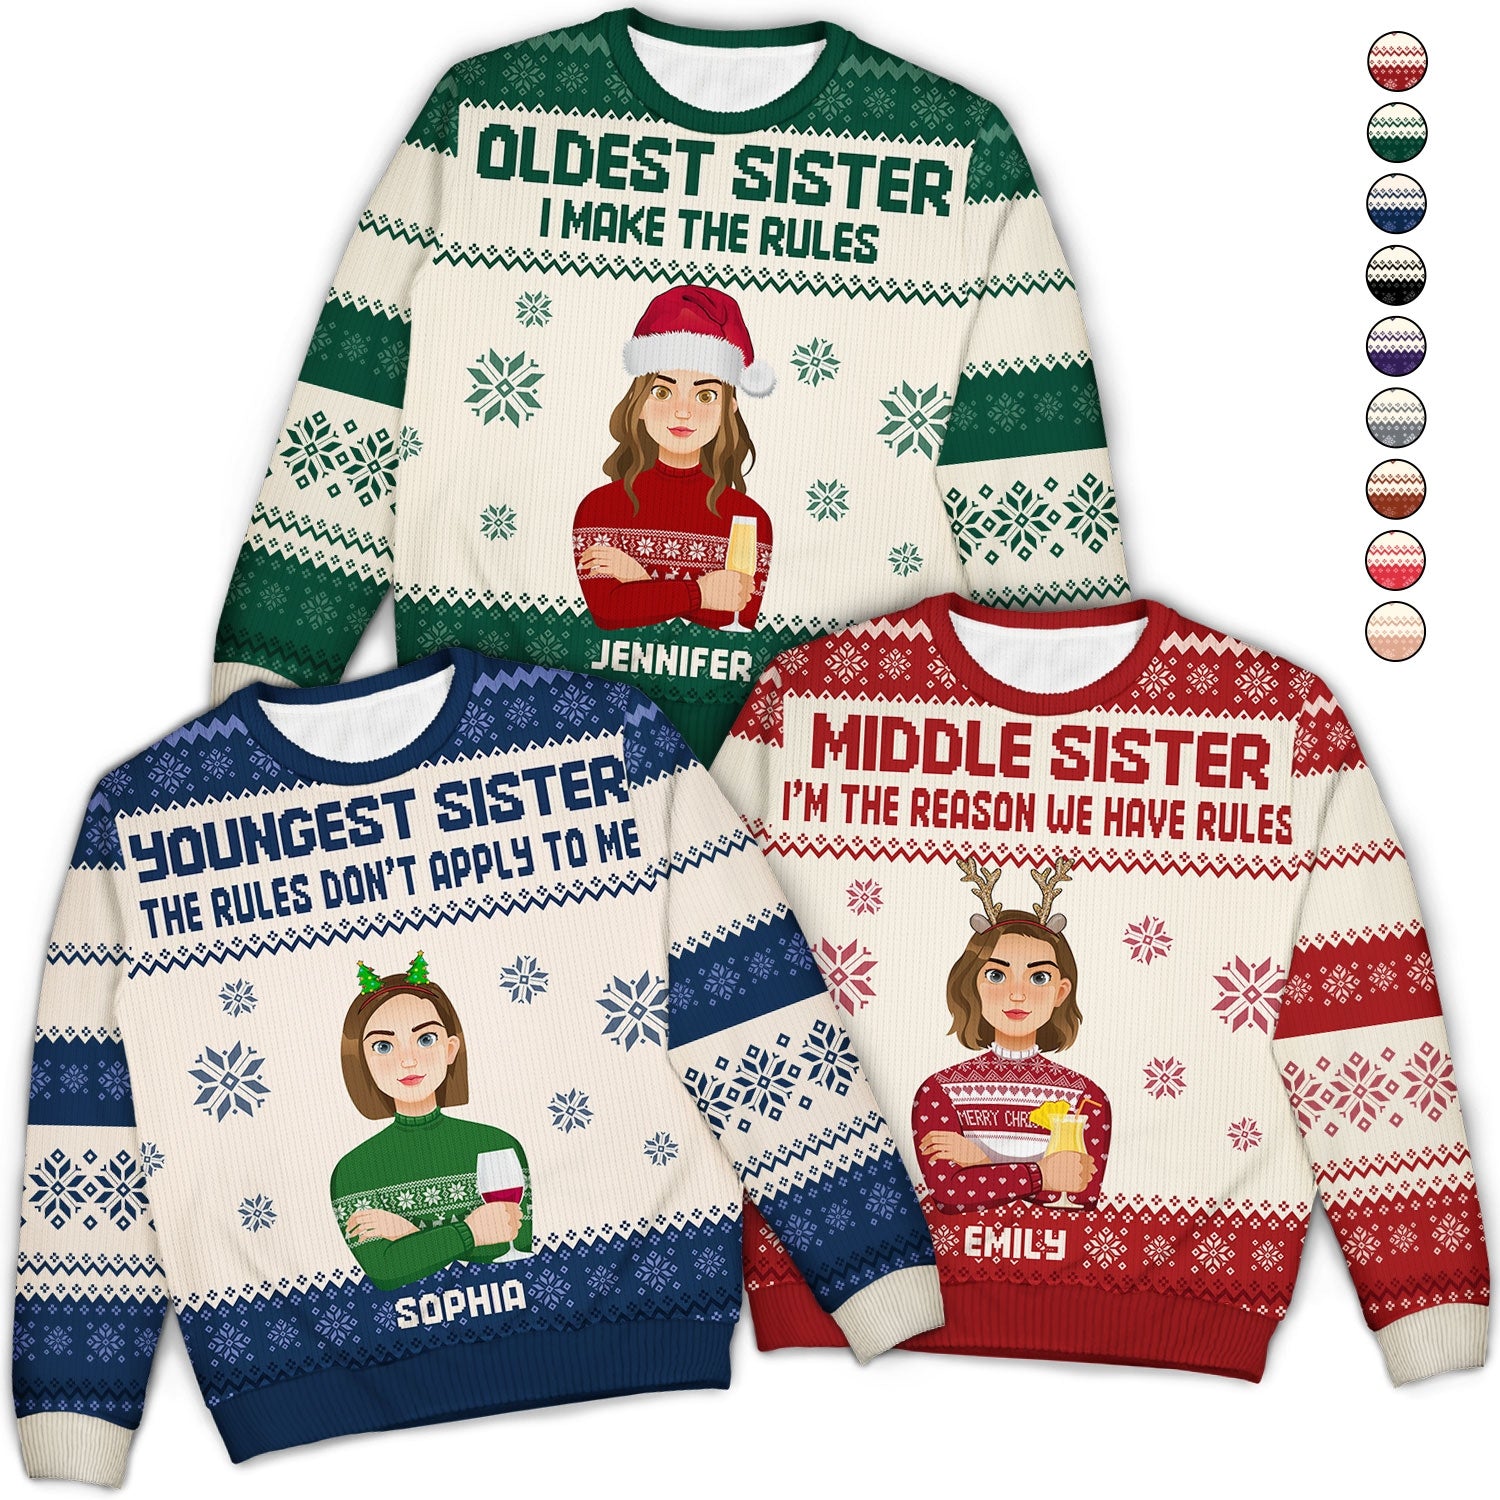 Sibling Rules - Christmas Gift For Sister, Brother, Siblings, Family - Personalized Unisex Ugly Sweater